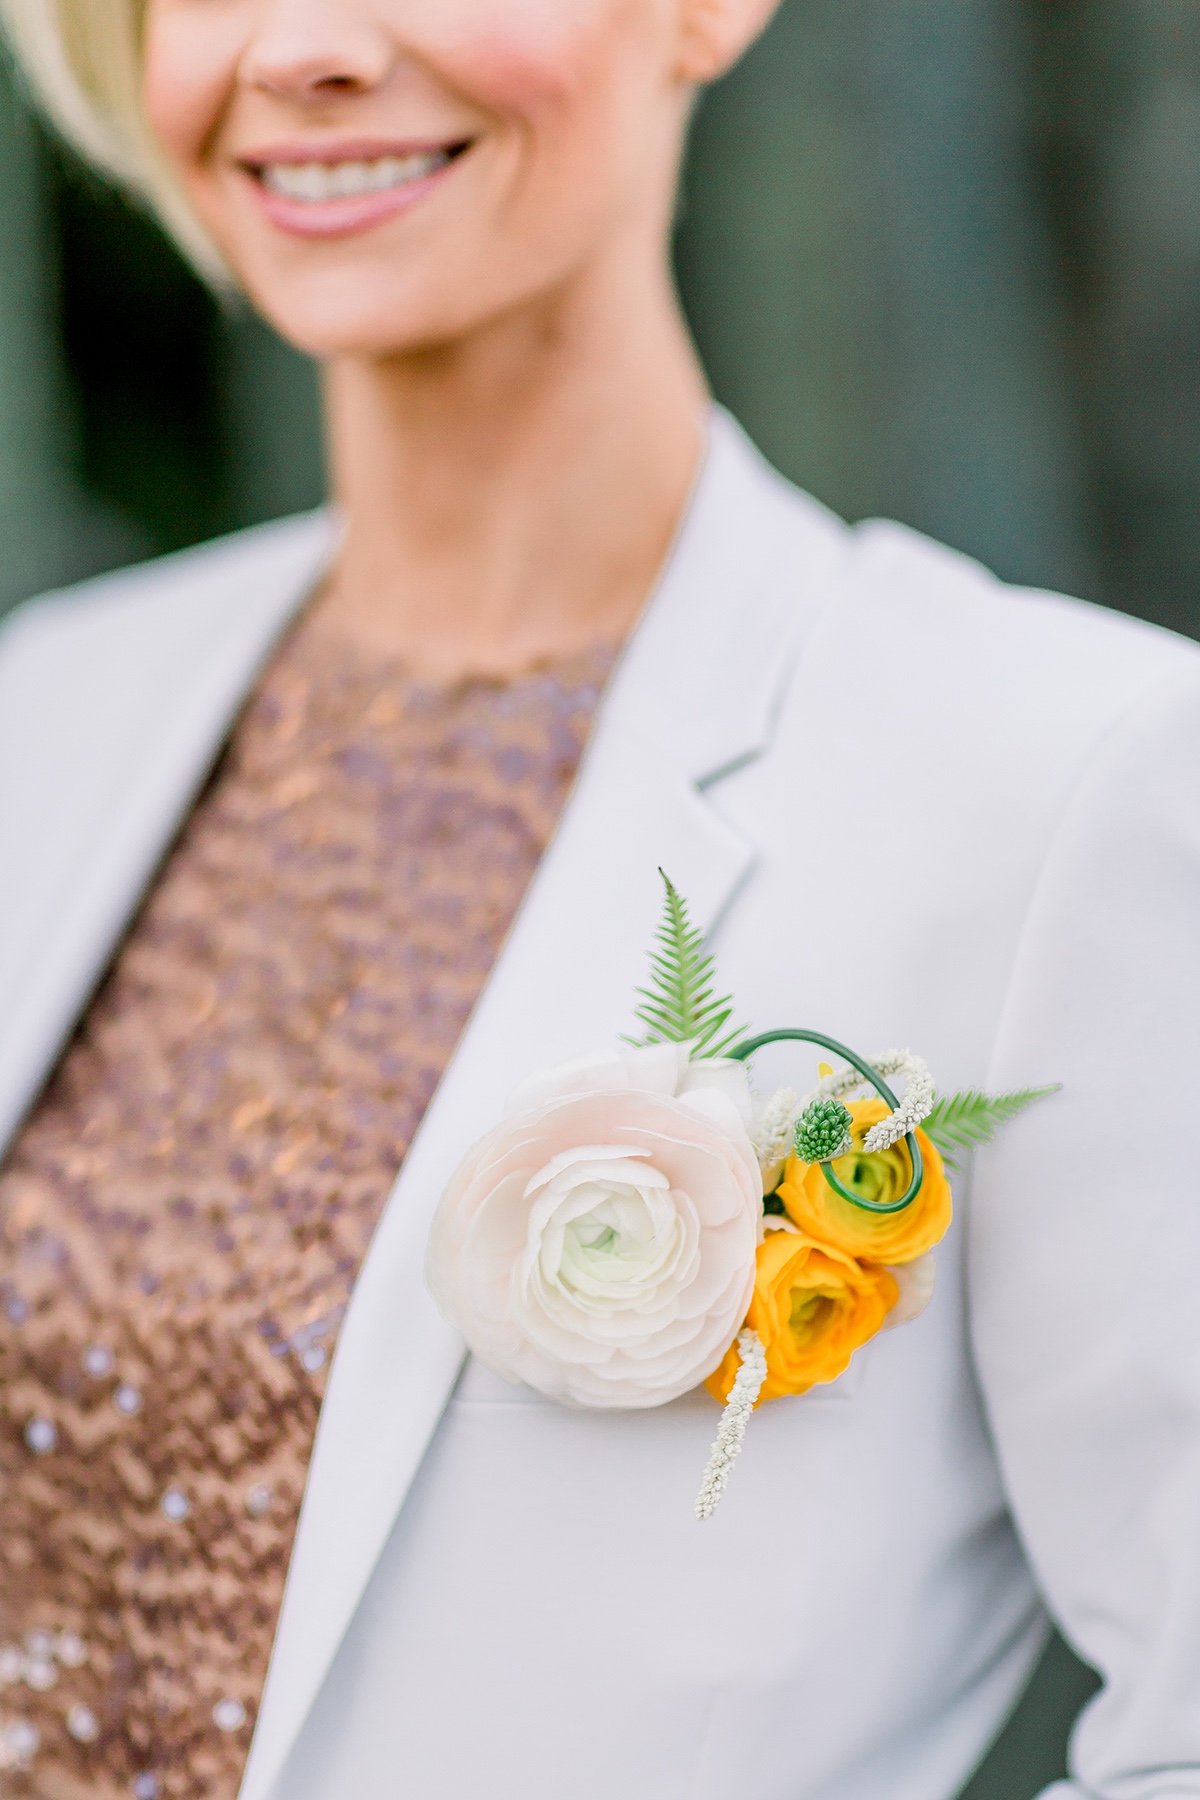 The Epitome of Elopement Style